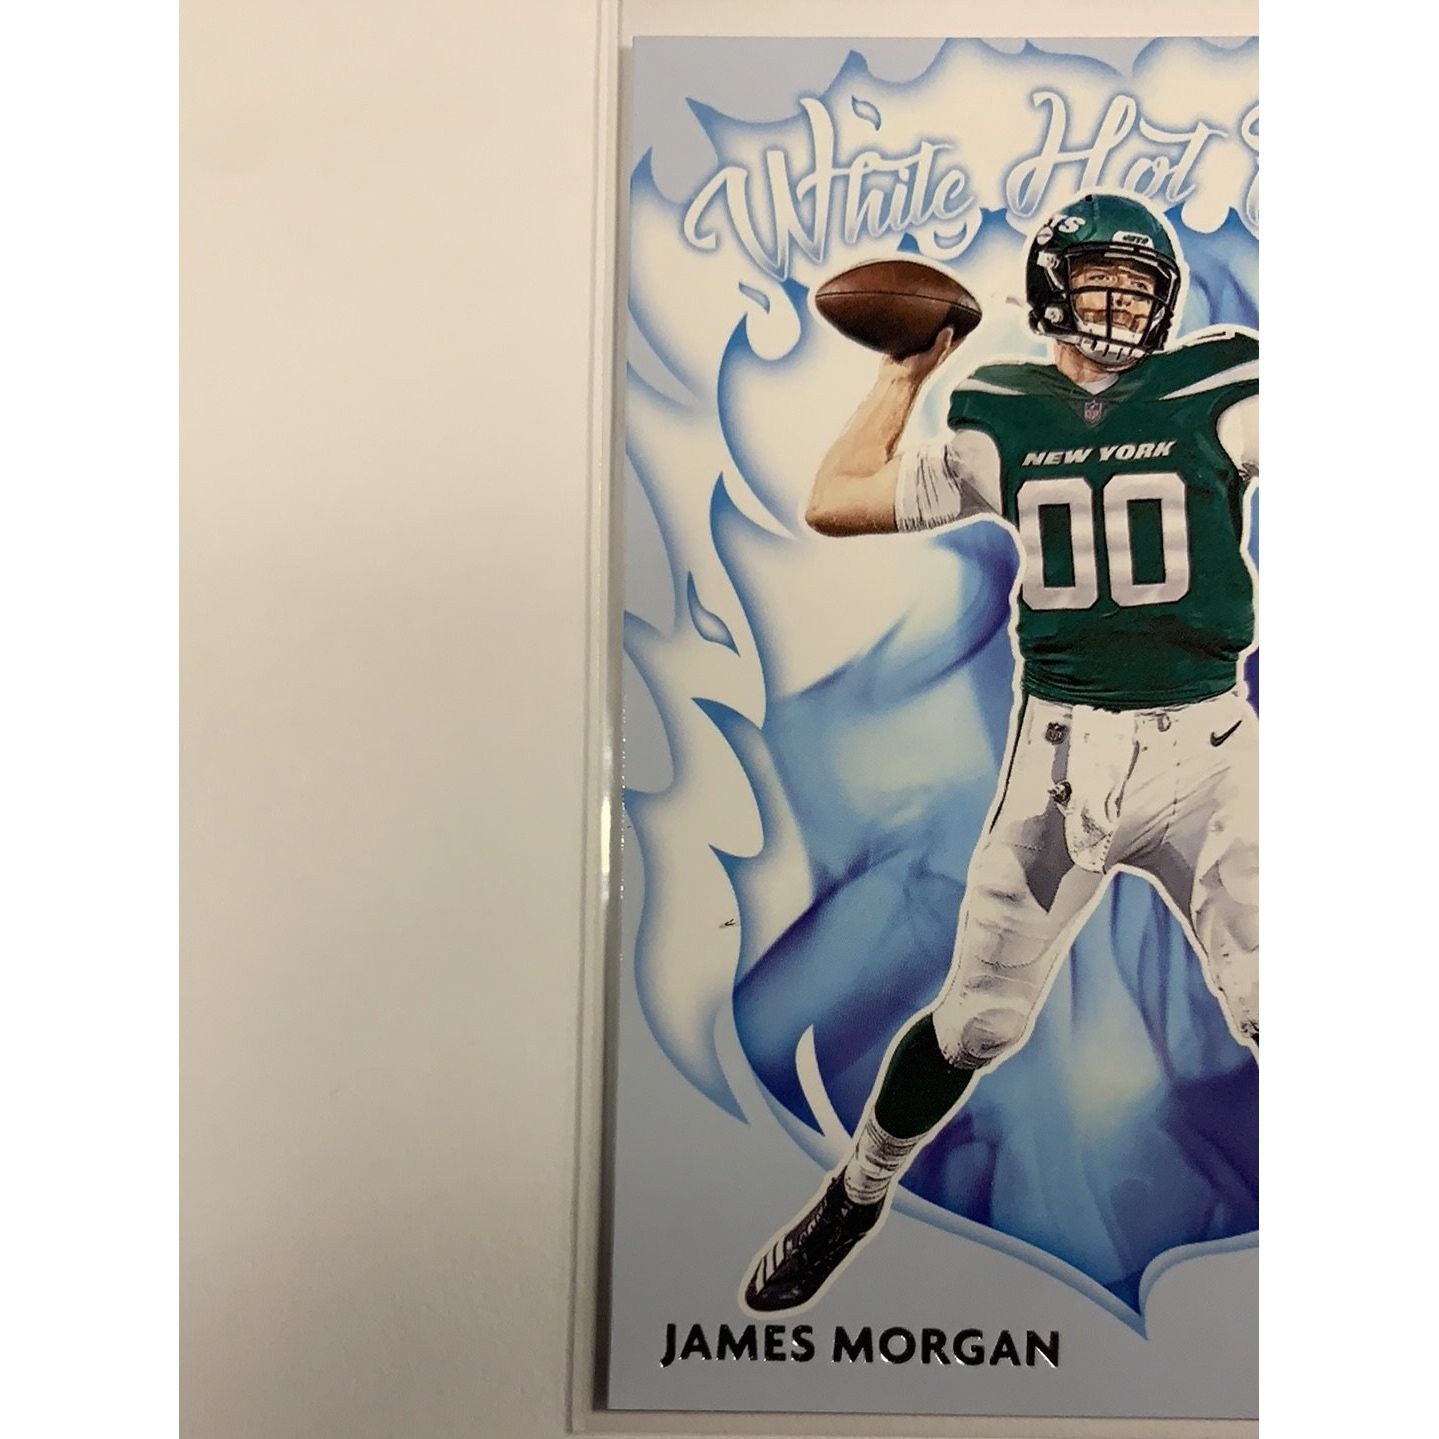  2020 Donruss James Morgan White Hot Rookies  Local Legends Cards & Collectibles